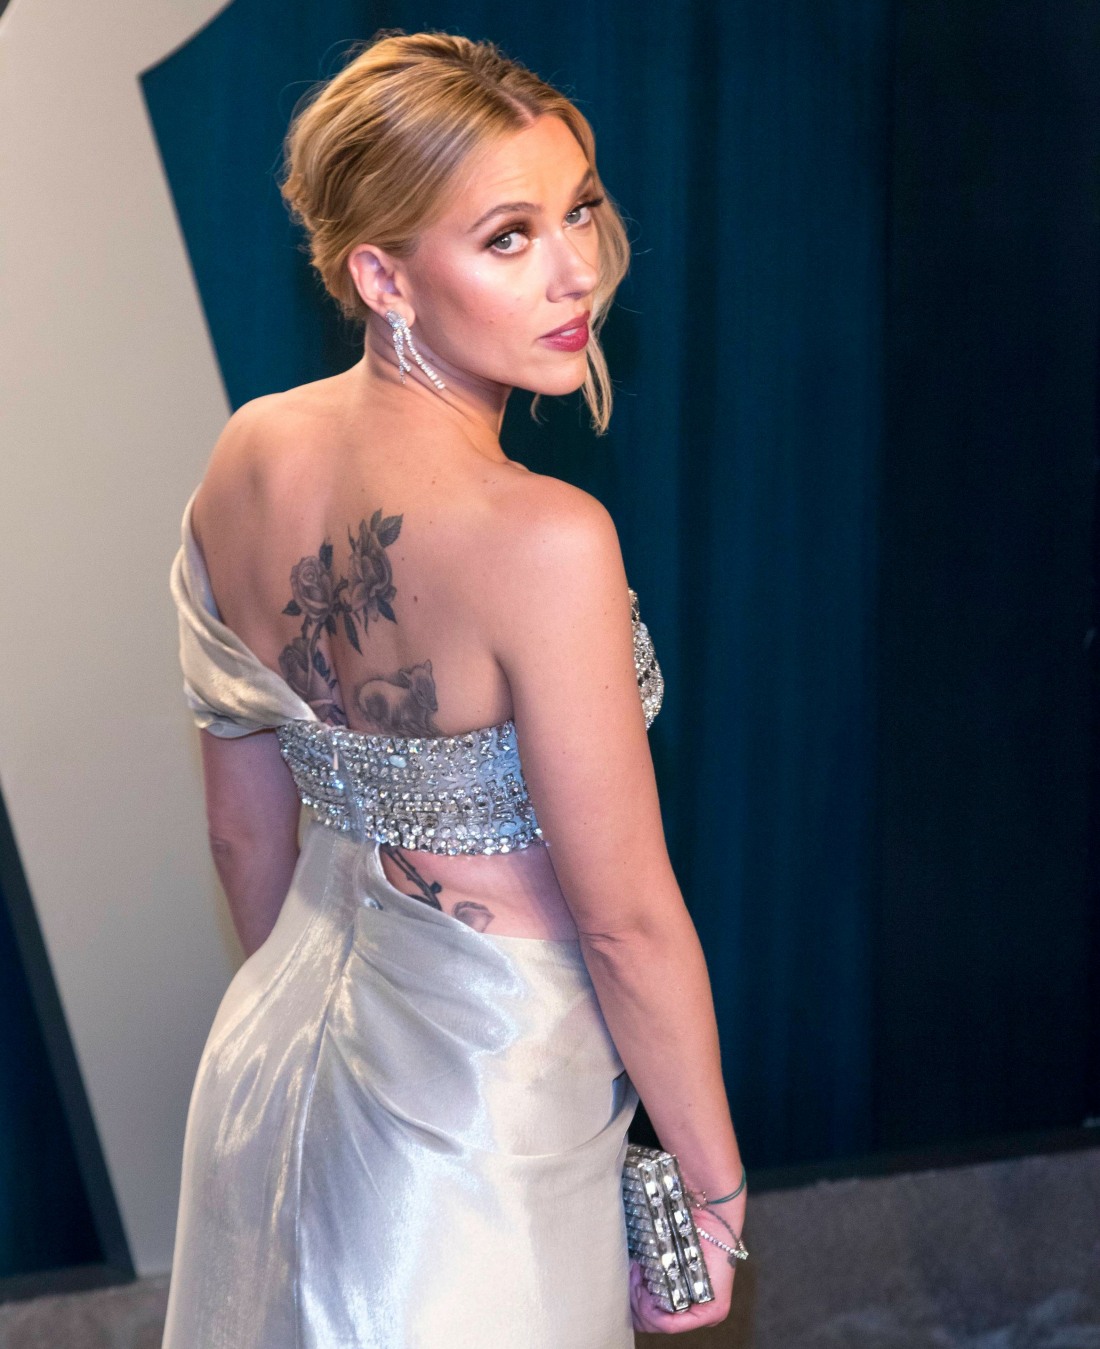 Scarlett Johansson attends the Vanity Fair Oscar Party at Wallis Annenberg Center for the Performing...